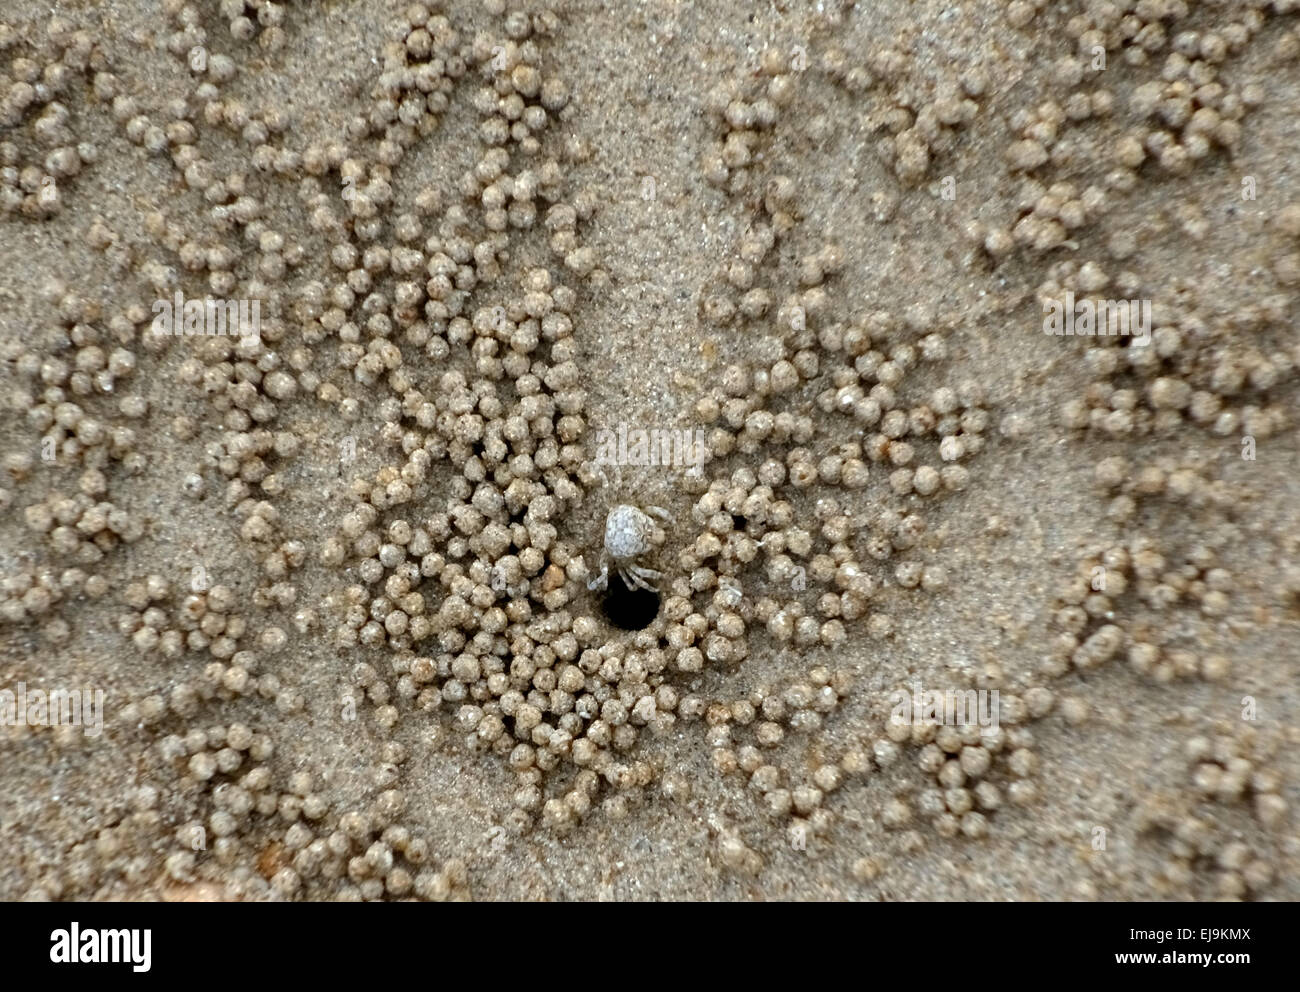 Bubbler crab, Scopimera sp. and patterns formed by balls and escape holes created in the sand, at low tide on a beach near Krabi Stock Photo